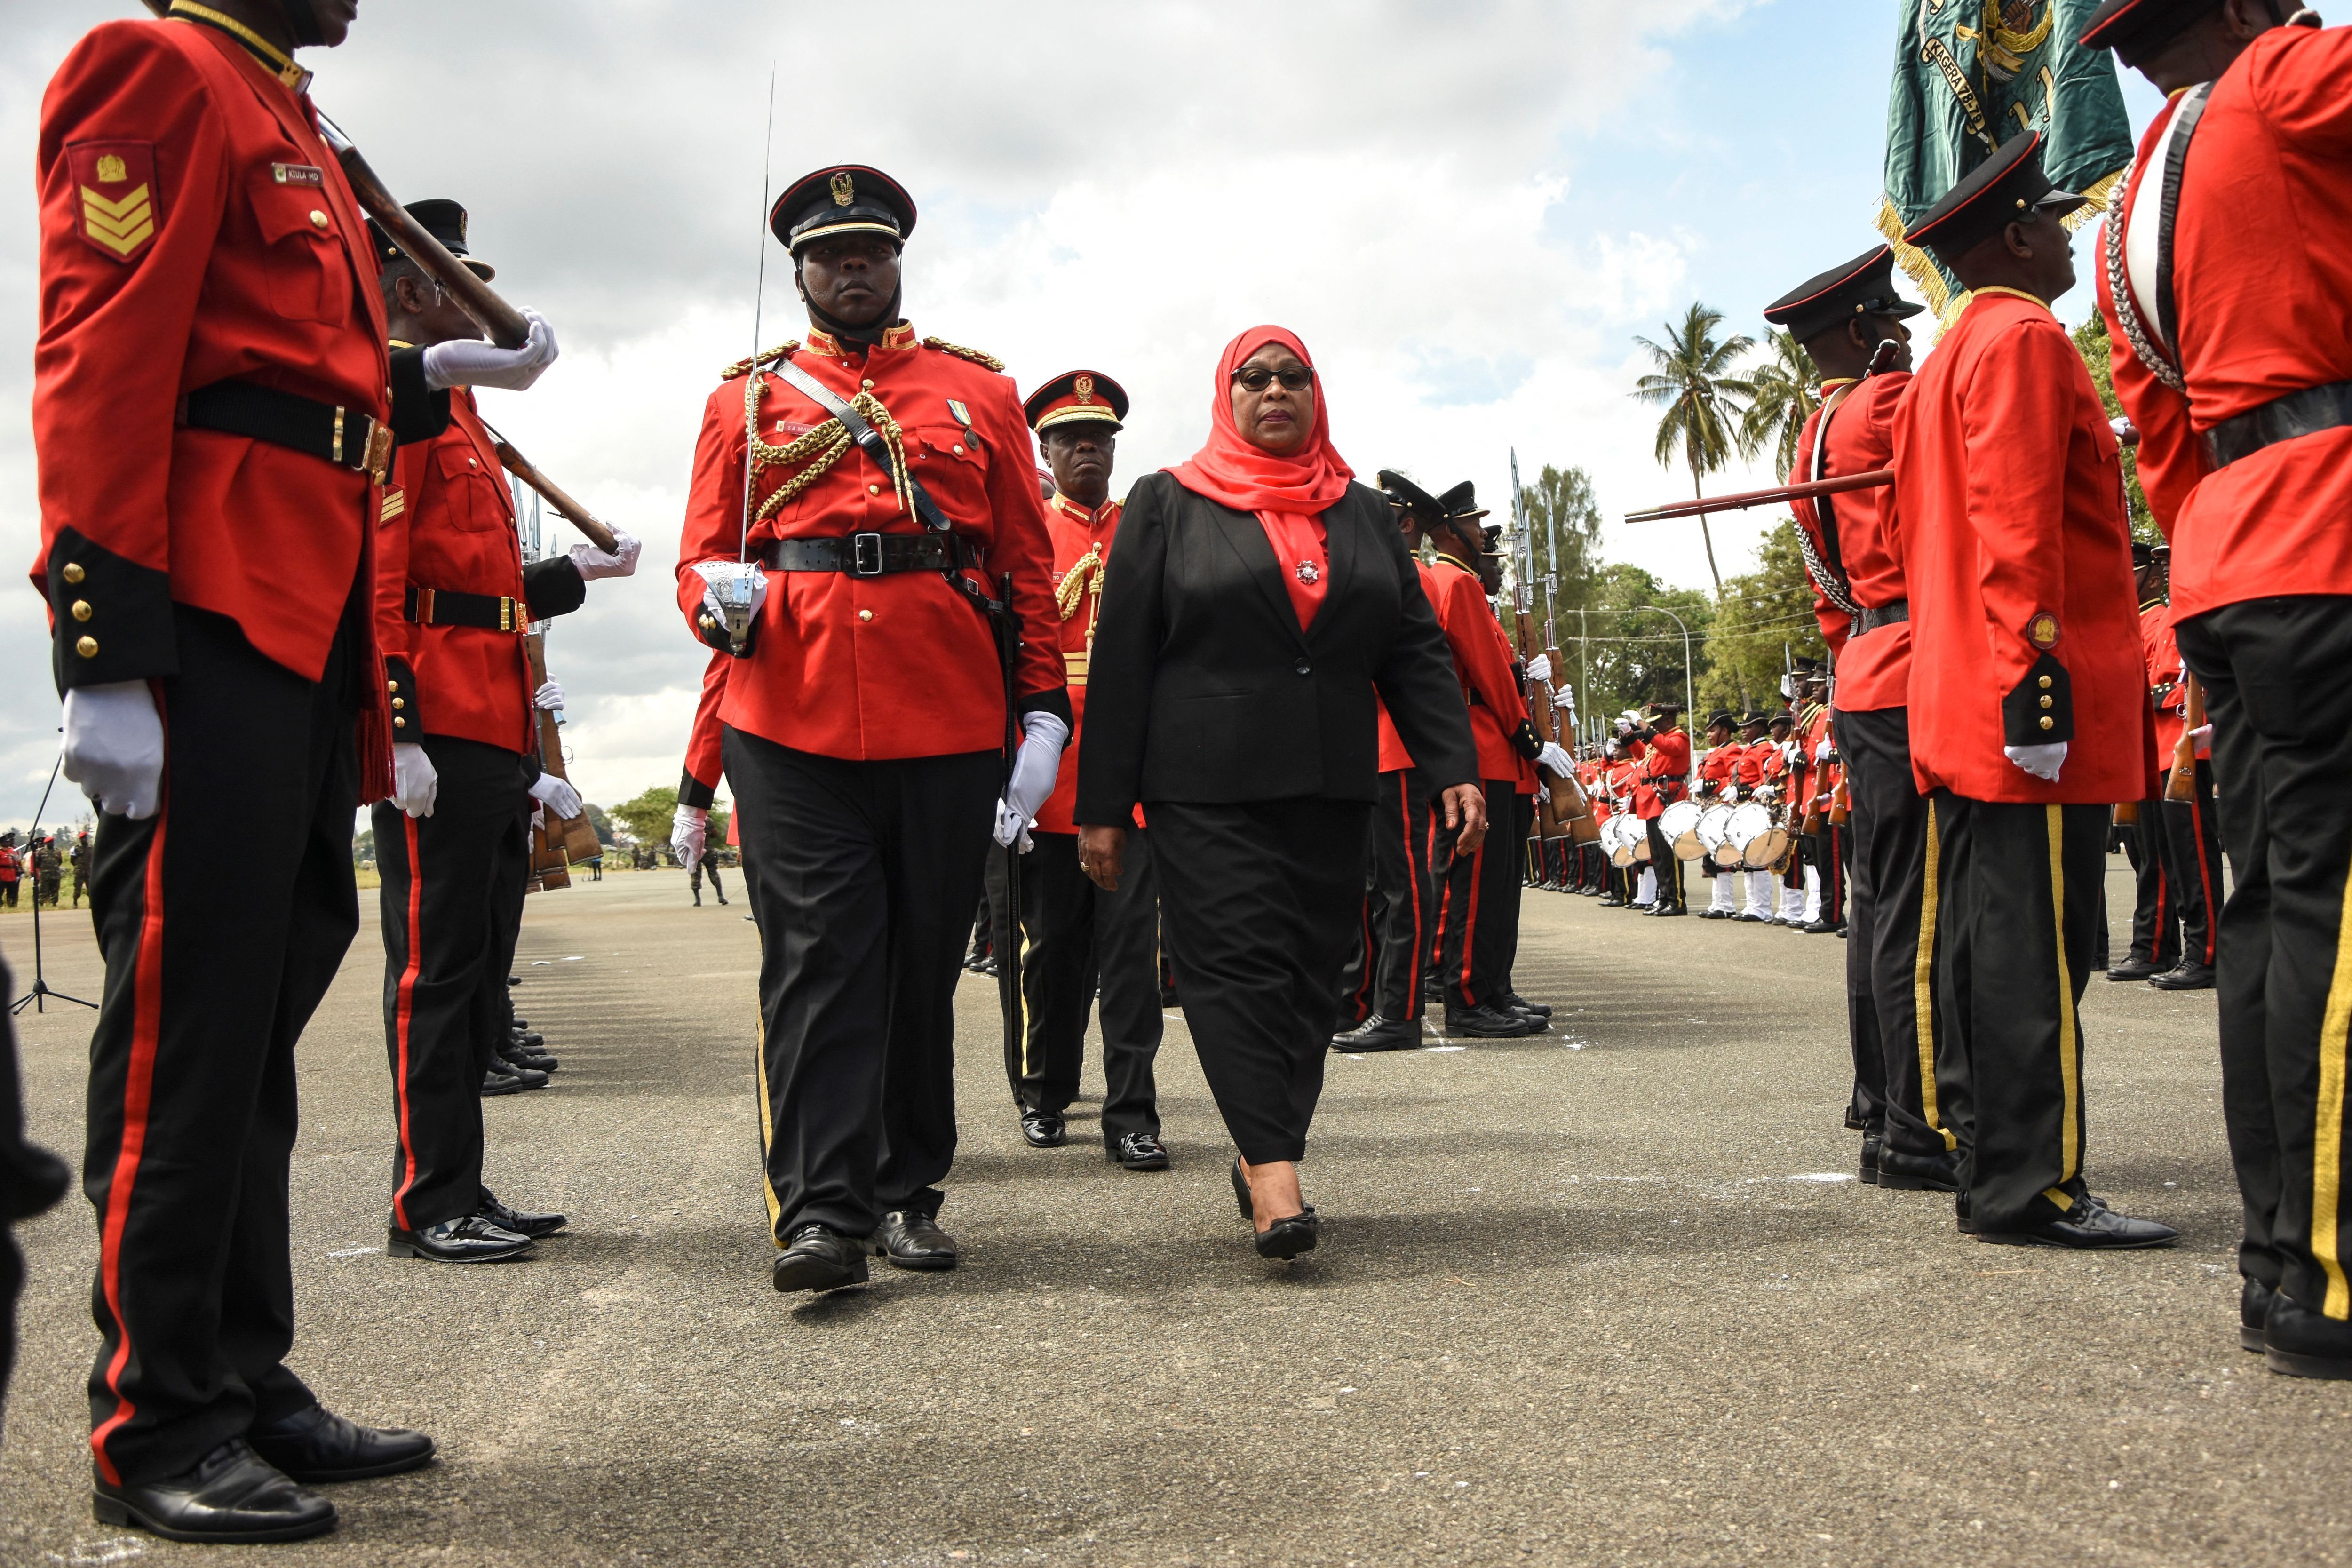 Samia Suluhu Hassan inspects a military honor guard after swearing-in ceremony as the country's first female President photo.